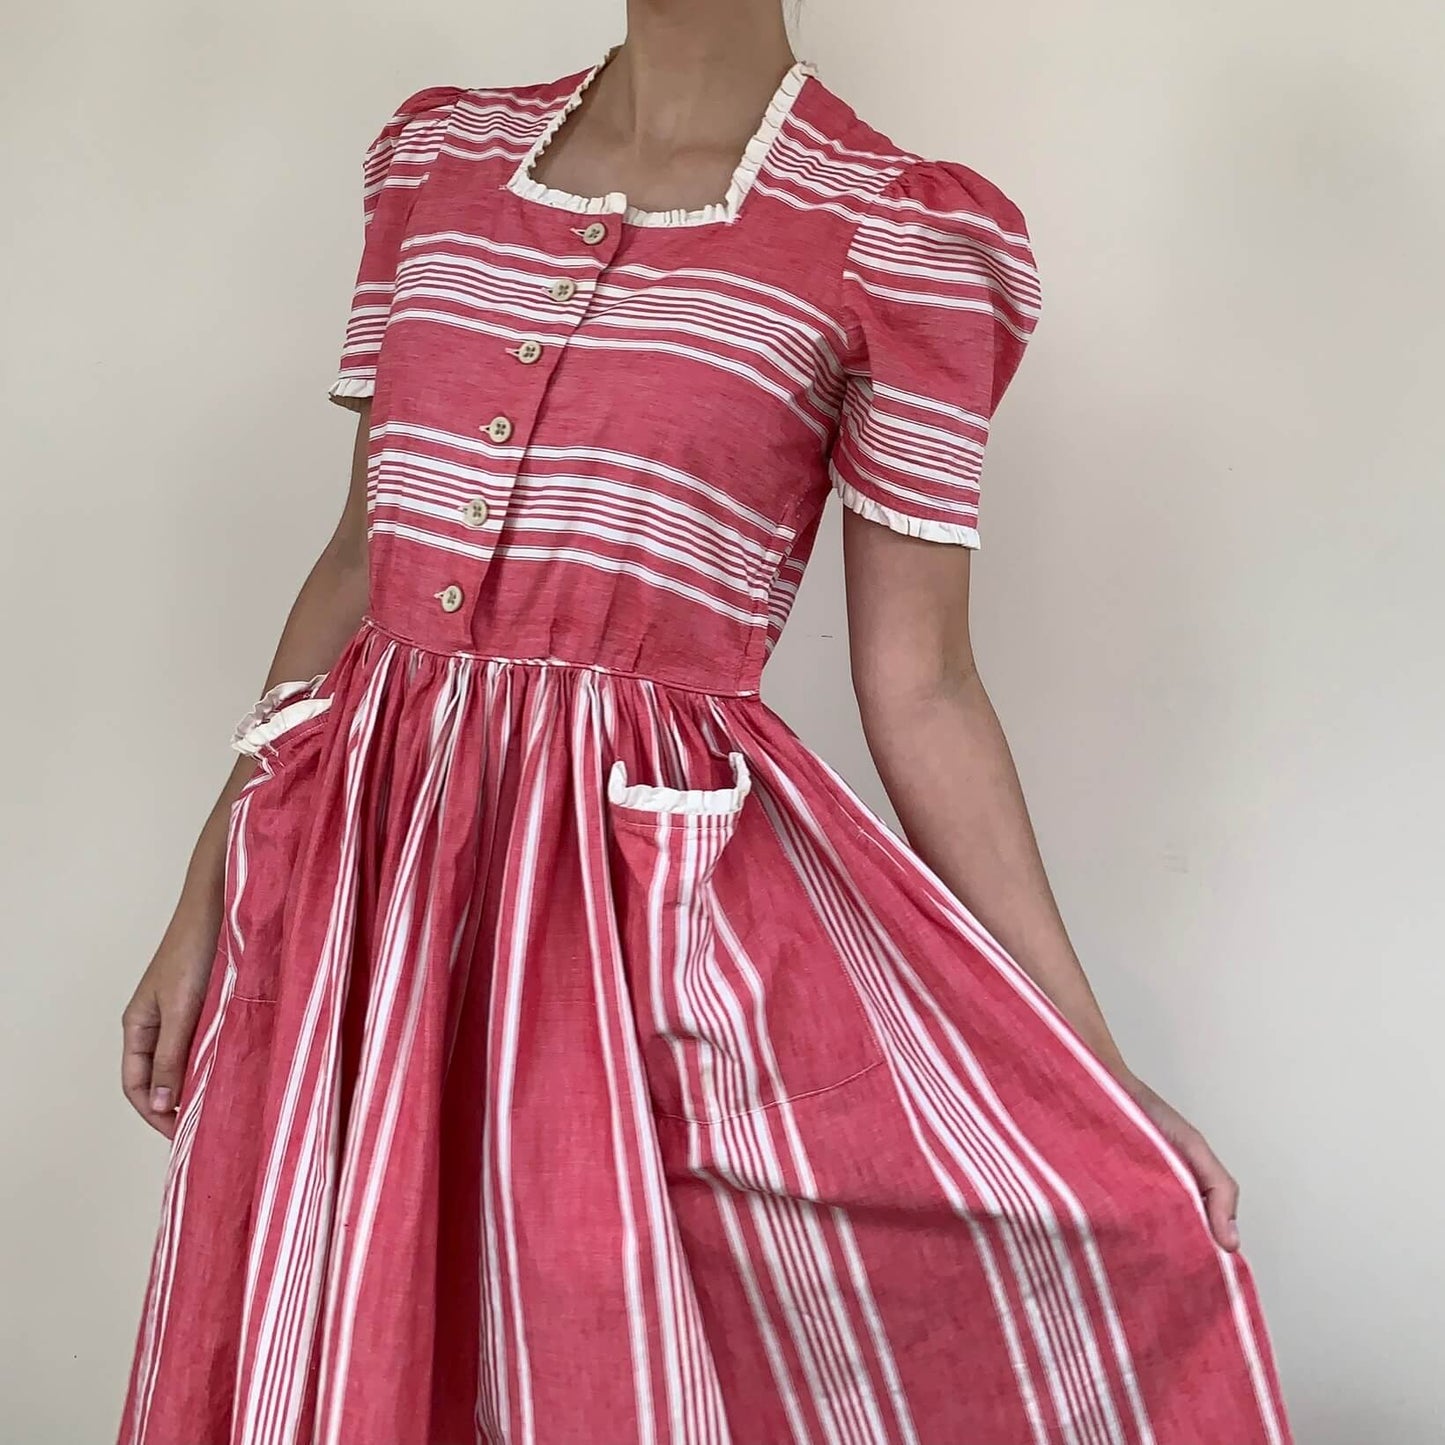 1950s pink vintage dress with patch pockets, puff sleeves, and striped cotton fabric